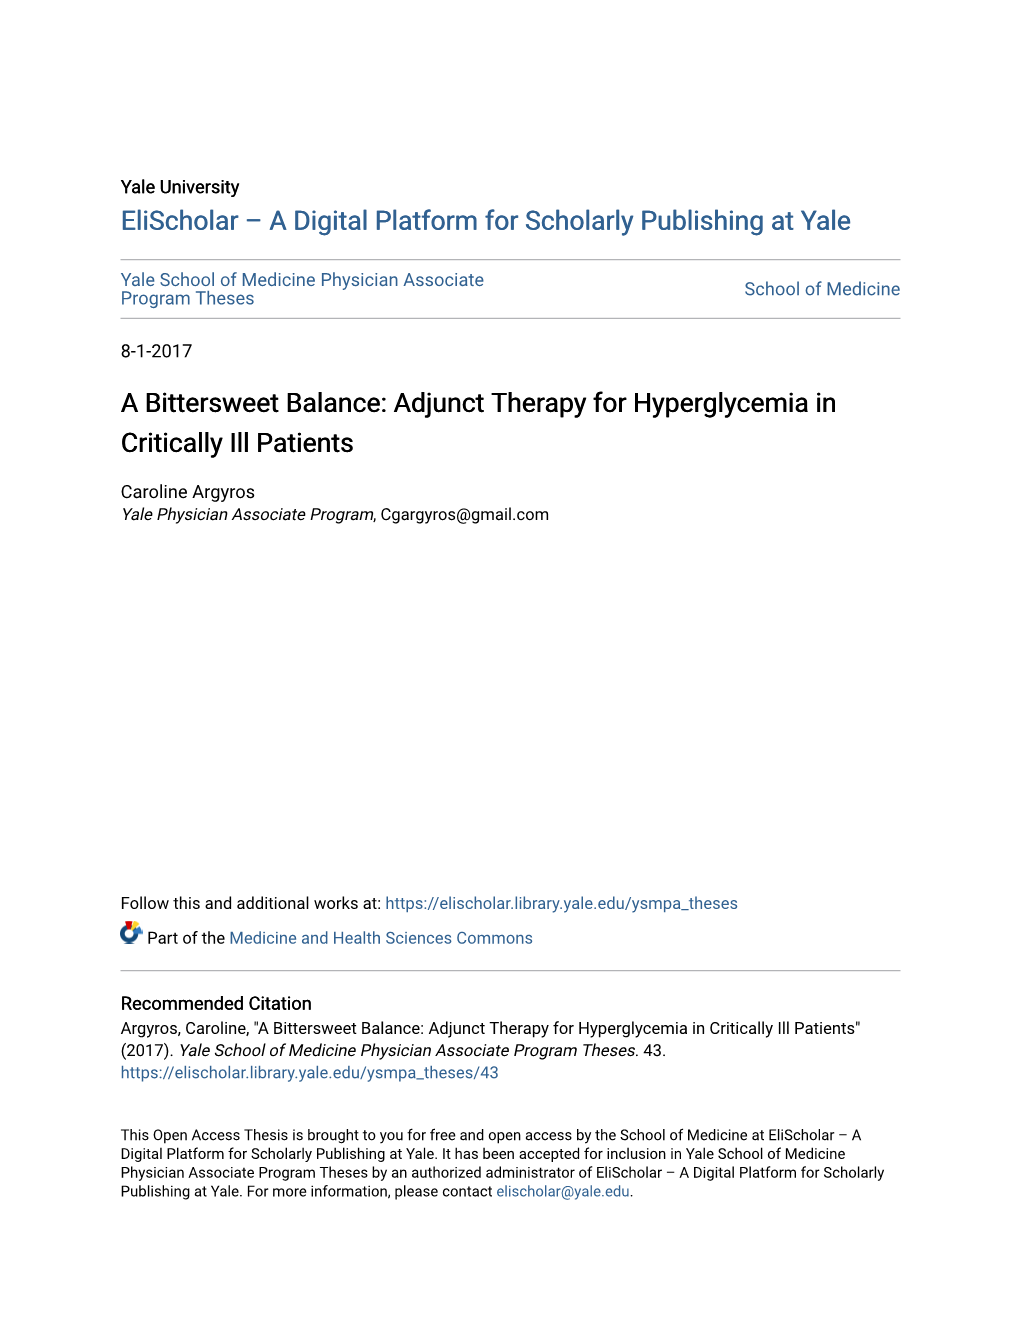 A Bittersweet Balance: Adjunct Therapy for Hyperglycemia in Critically Ill Patients